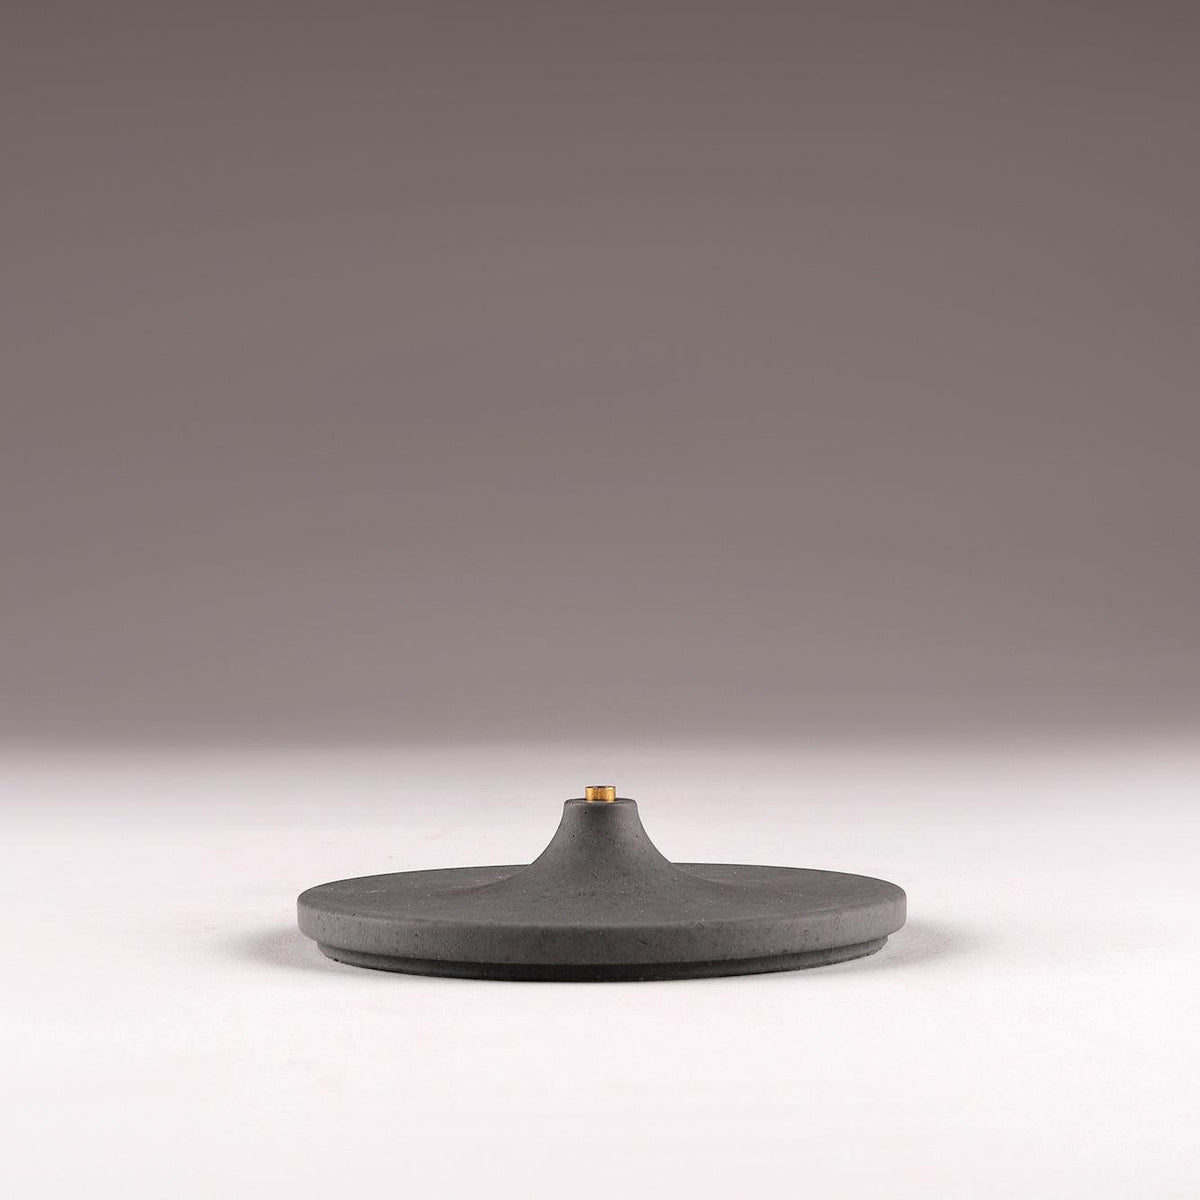 Side View of modern incense burner Disk by Kin Objects